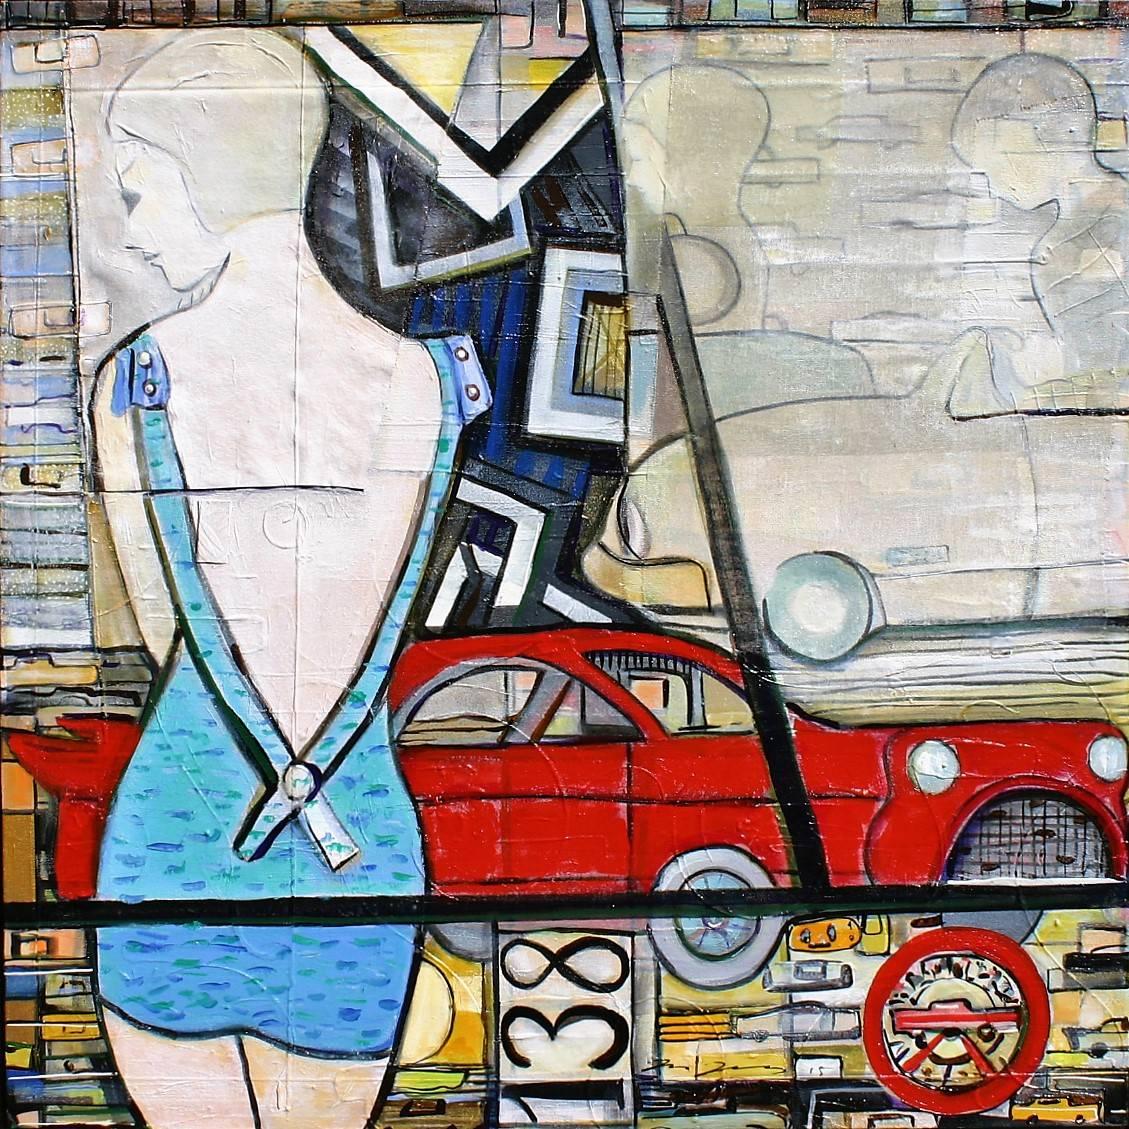 José Gonçalves Figurative Painting - Woman At Drive-In Movie Theater // "Time Ago"